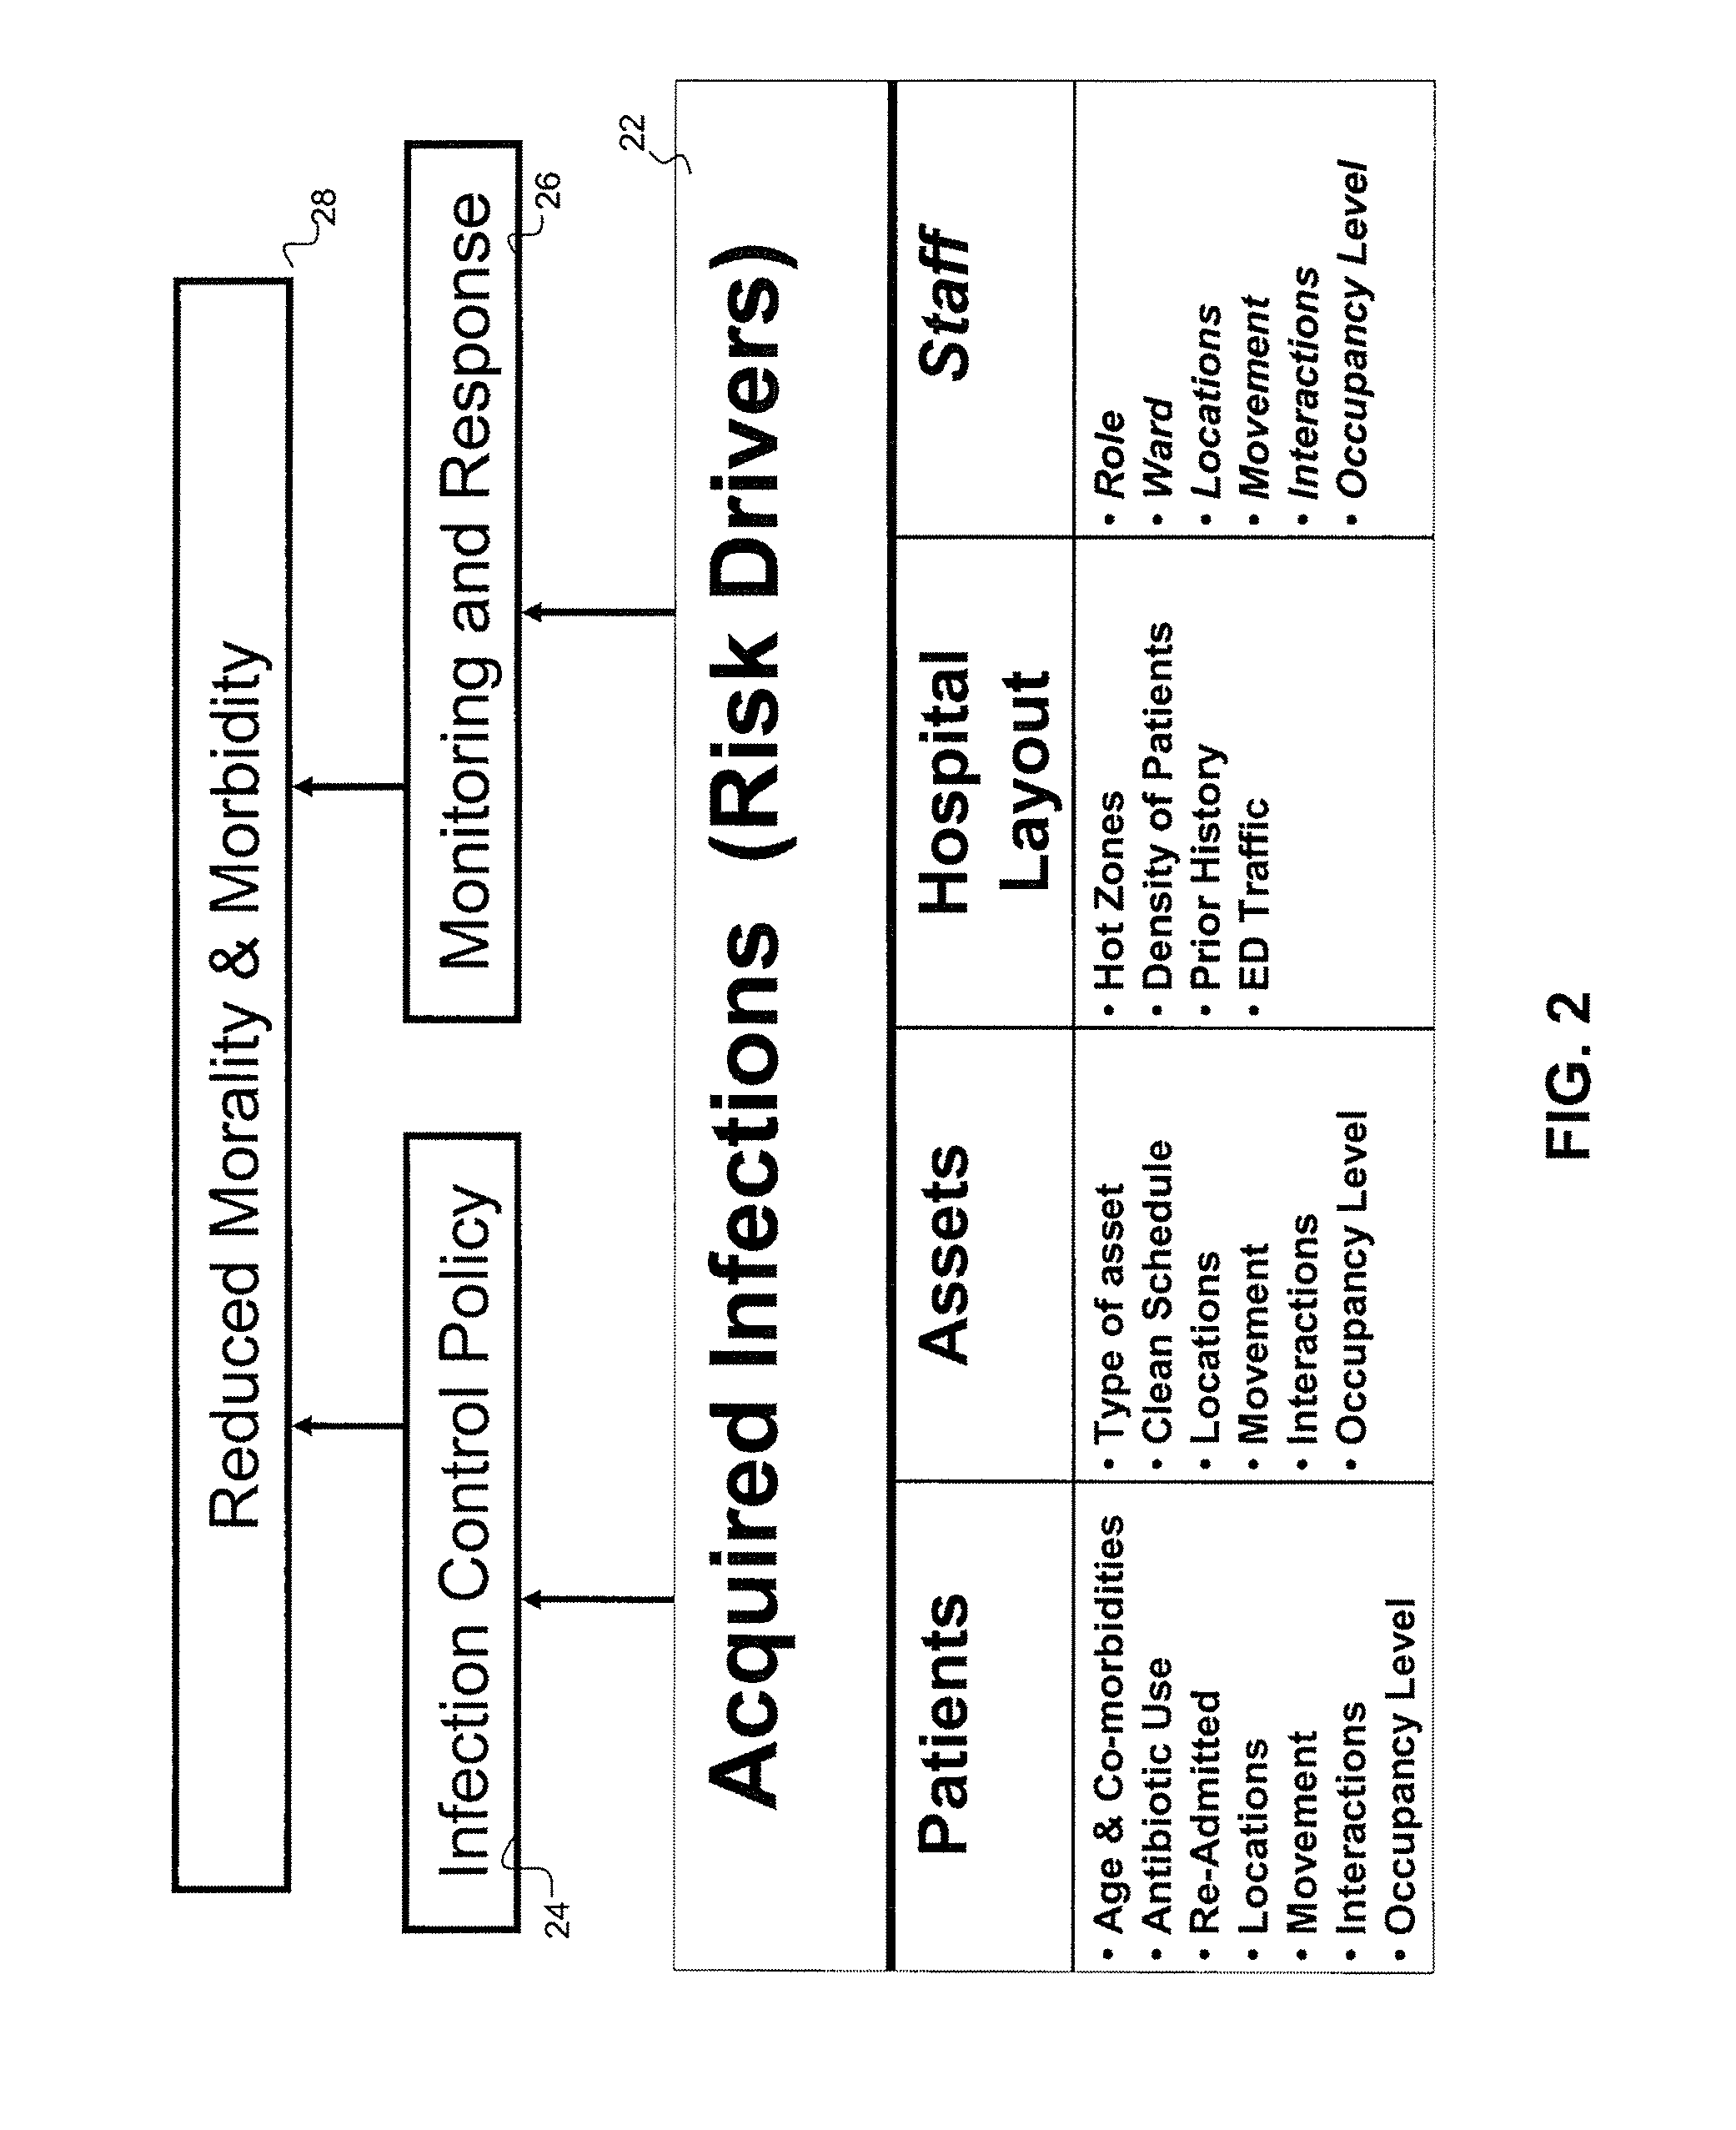 Disease Mapping and Infection Control System and Method